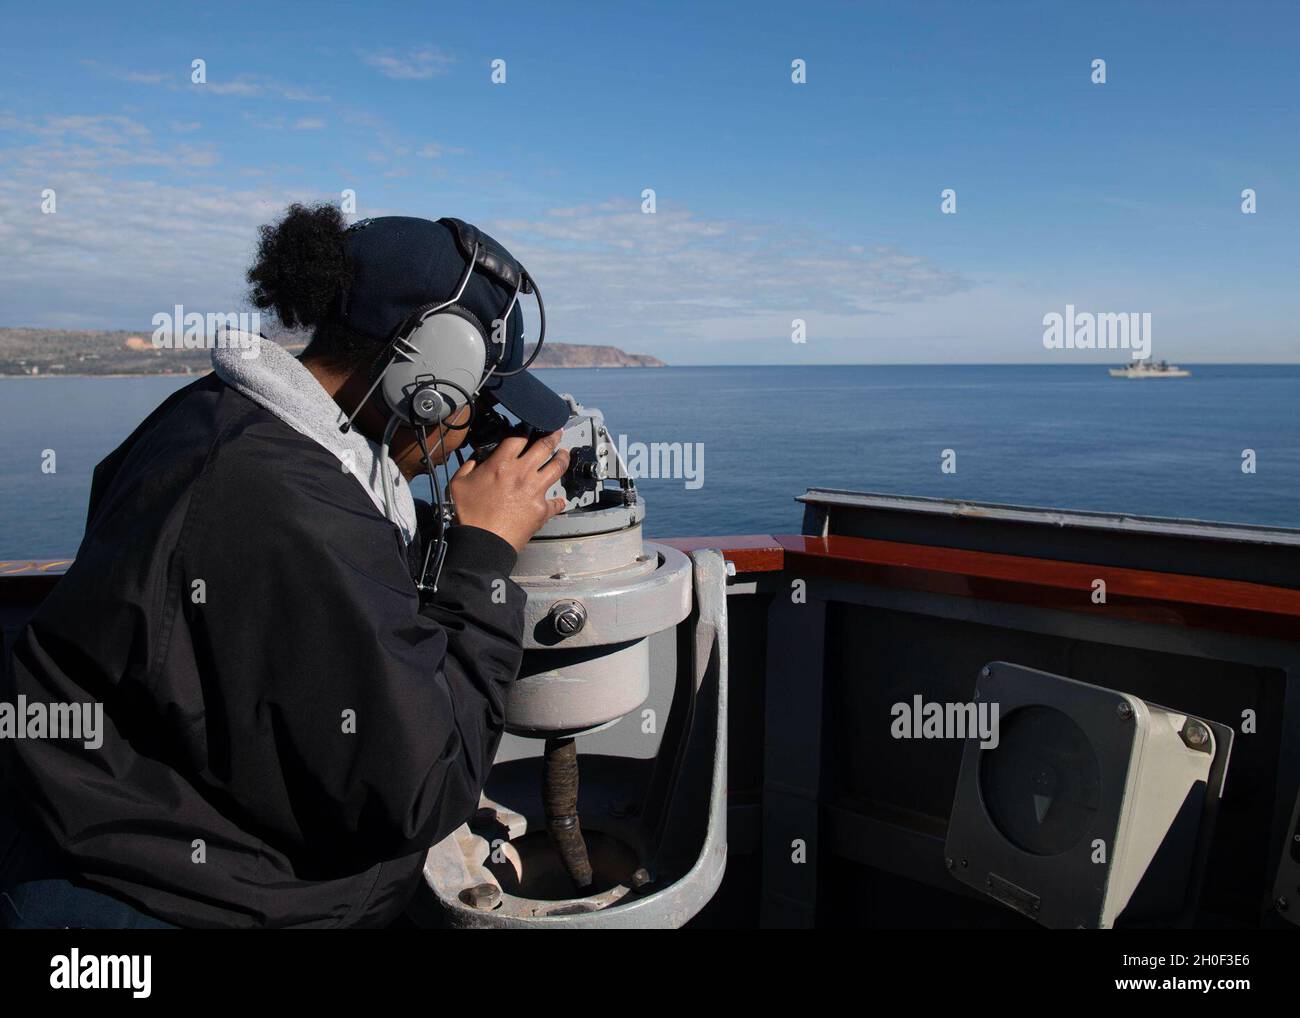 210220-N-RG171-0118 SOUDA BAY, Greece (Feb. 20, 2021) Quartermaster Seaman Apprentice Aaliyah McBride looks through a telescopic alidade as the Arleigh Burke-class guided-missile destroyer USS Donald Cook (DDG 75) departs Souda Bay, Greece, Feb. 20, 2021. Donald Cook, forward-deployed to Rota, Spain, is on patrol in the U.S. Sixth Fleet area of operations in support of regional allies and partners and U.S. national security in Europe and Africa. Stock Photo